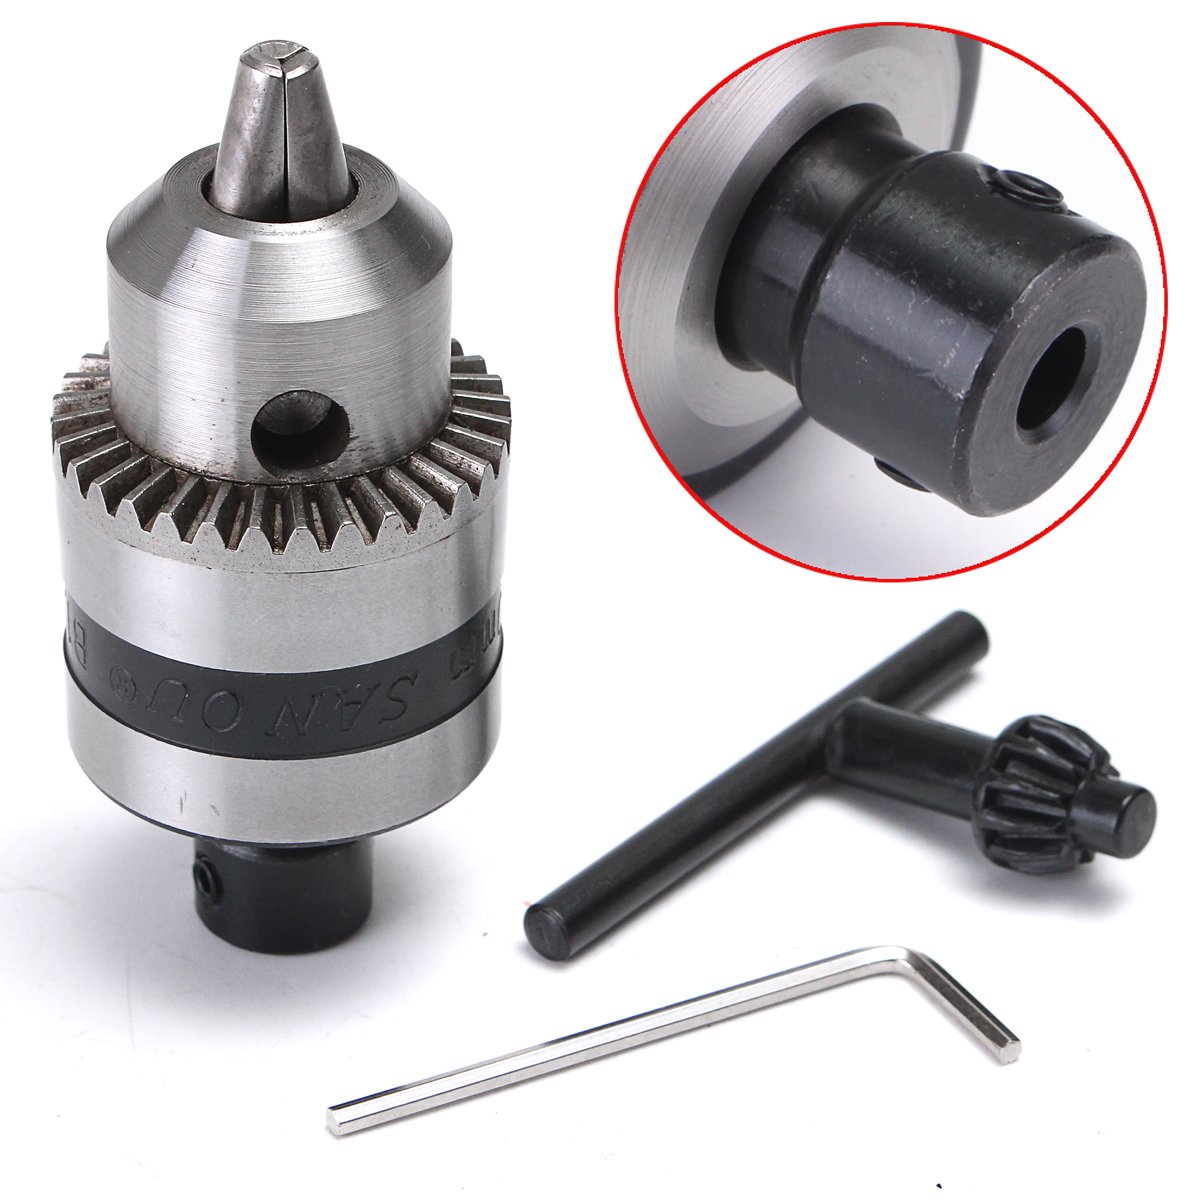 1.5-10mm Electric Drill Chuck with 5mm Steel Shaft Mount B12 Inner Hole Drill Chuck Adapter